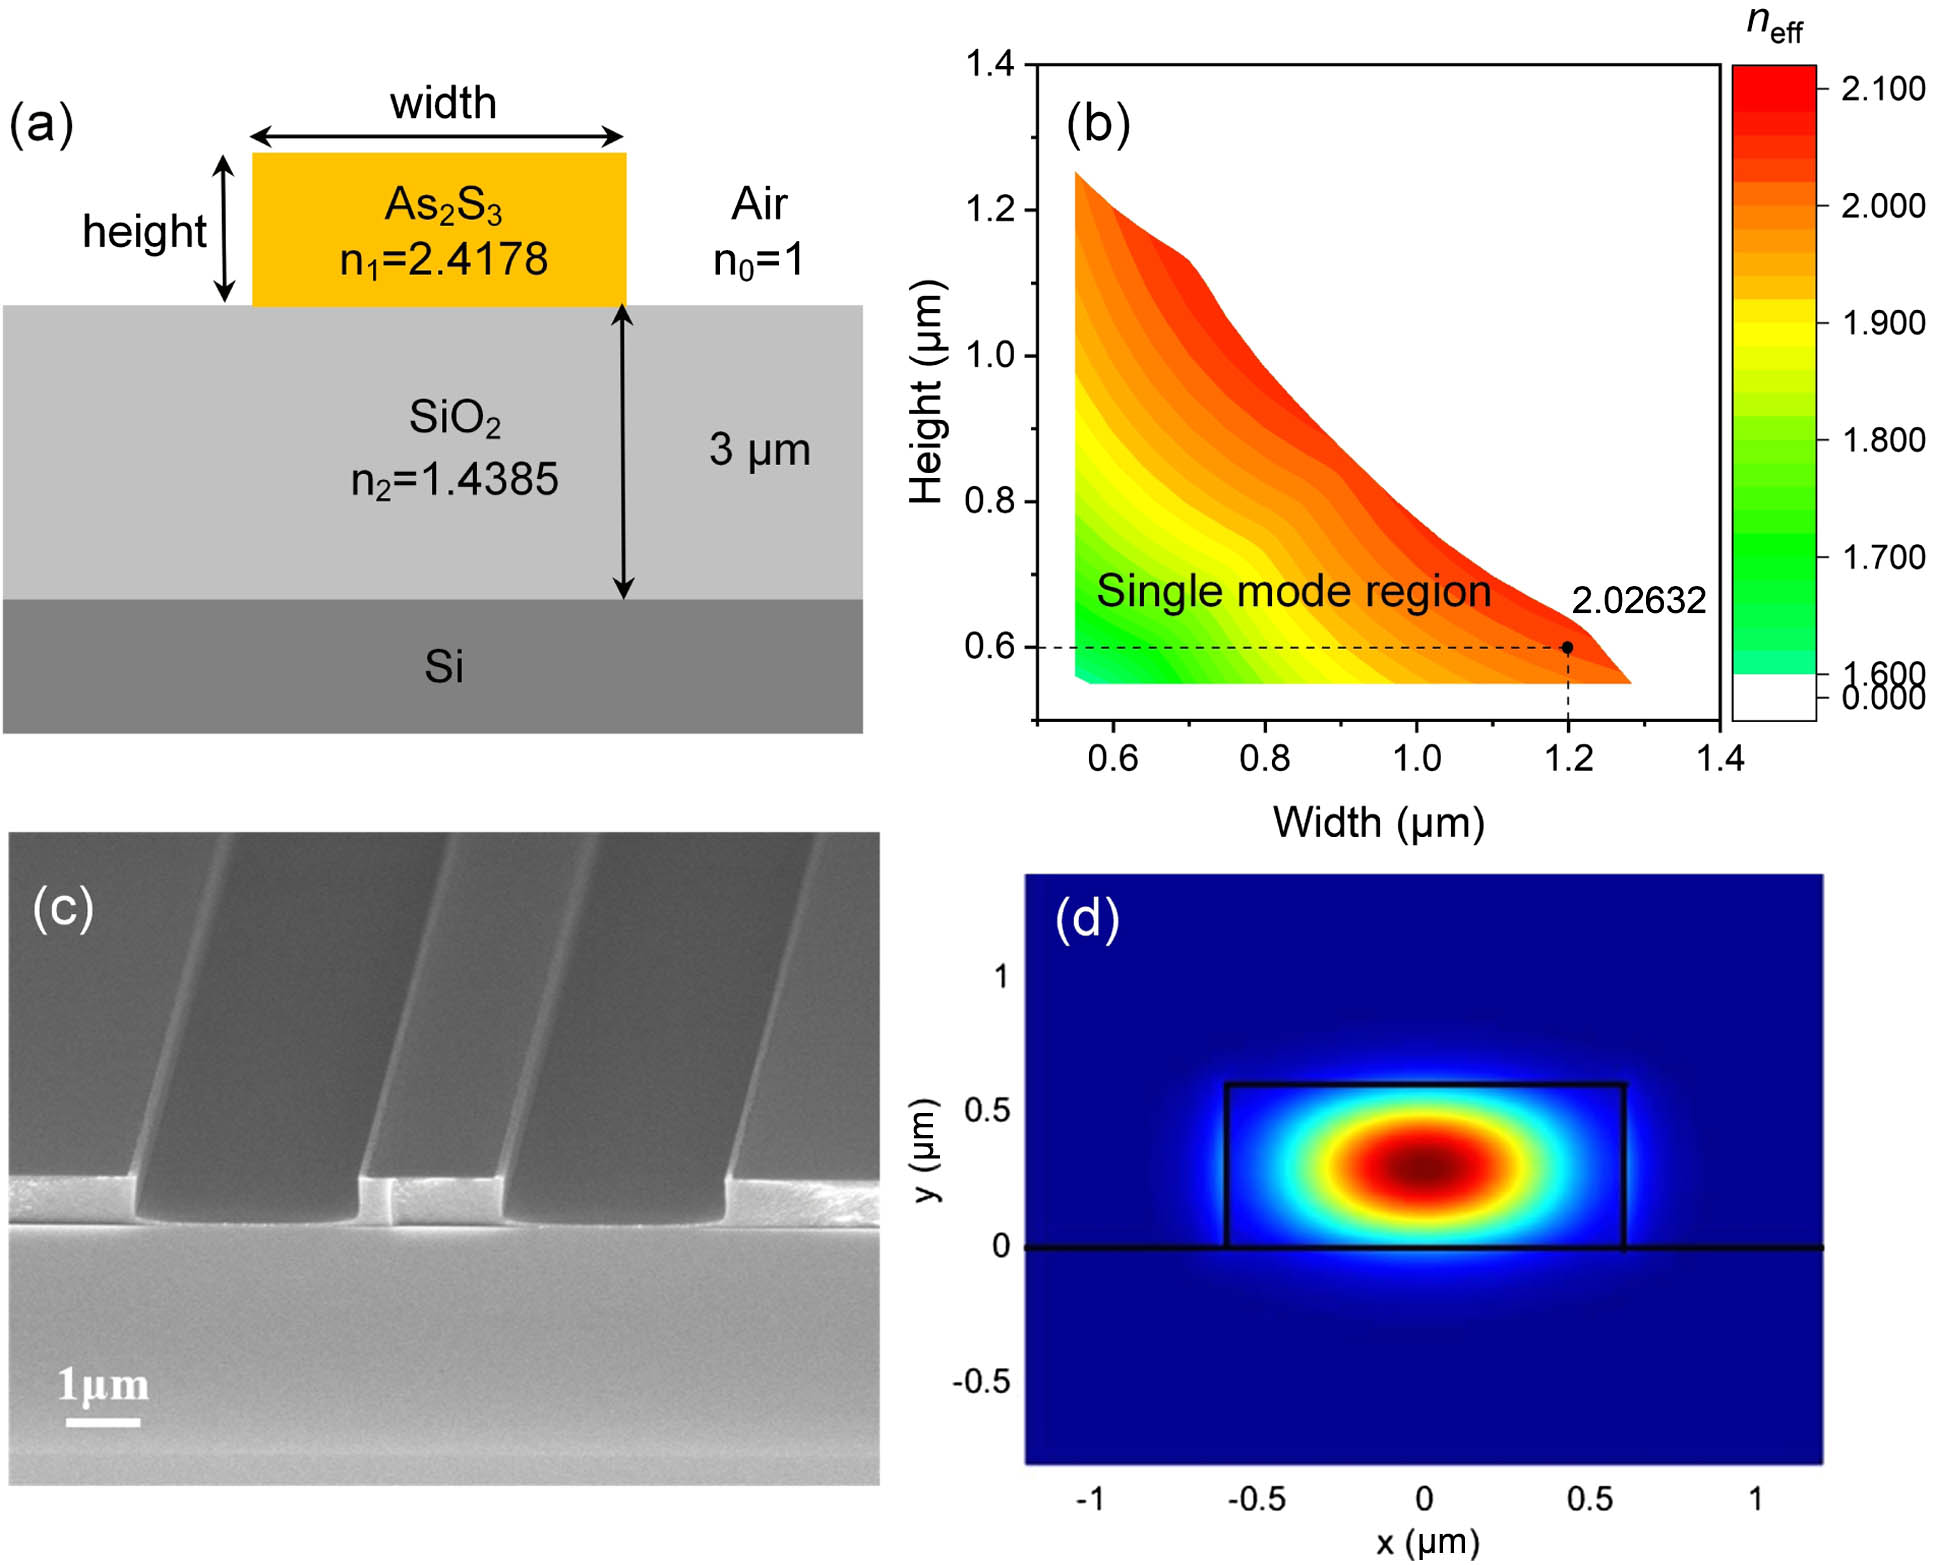 (a) Cross-section sketch of the As2S3 strip waveguide showing the refractive indices of different layers. (b) Calculated effective refractive index of fundamental TE mode as a function of width and height of the strip waveguide at 1950 nm; the color area depicts the single-mode region. (c) SEM image of the cross section of strip waveguides. (d) Simulated electrical field of the fundamental TE mode in the 0.6 μm×1.2 μm strip waveguide.